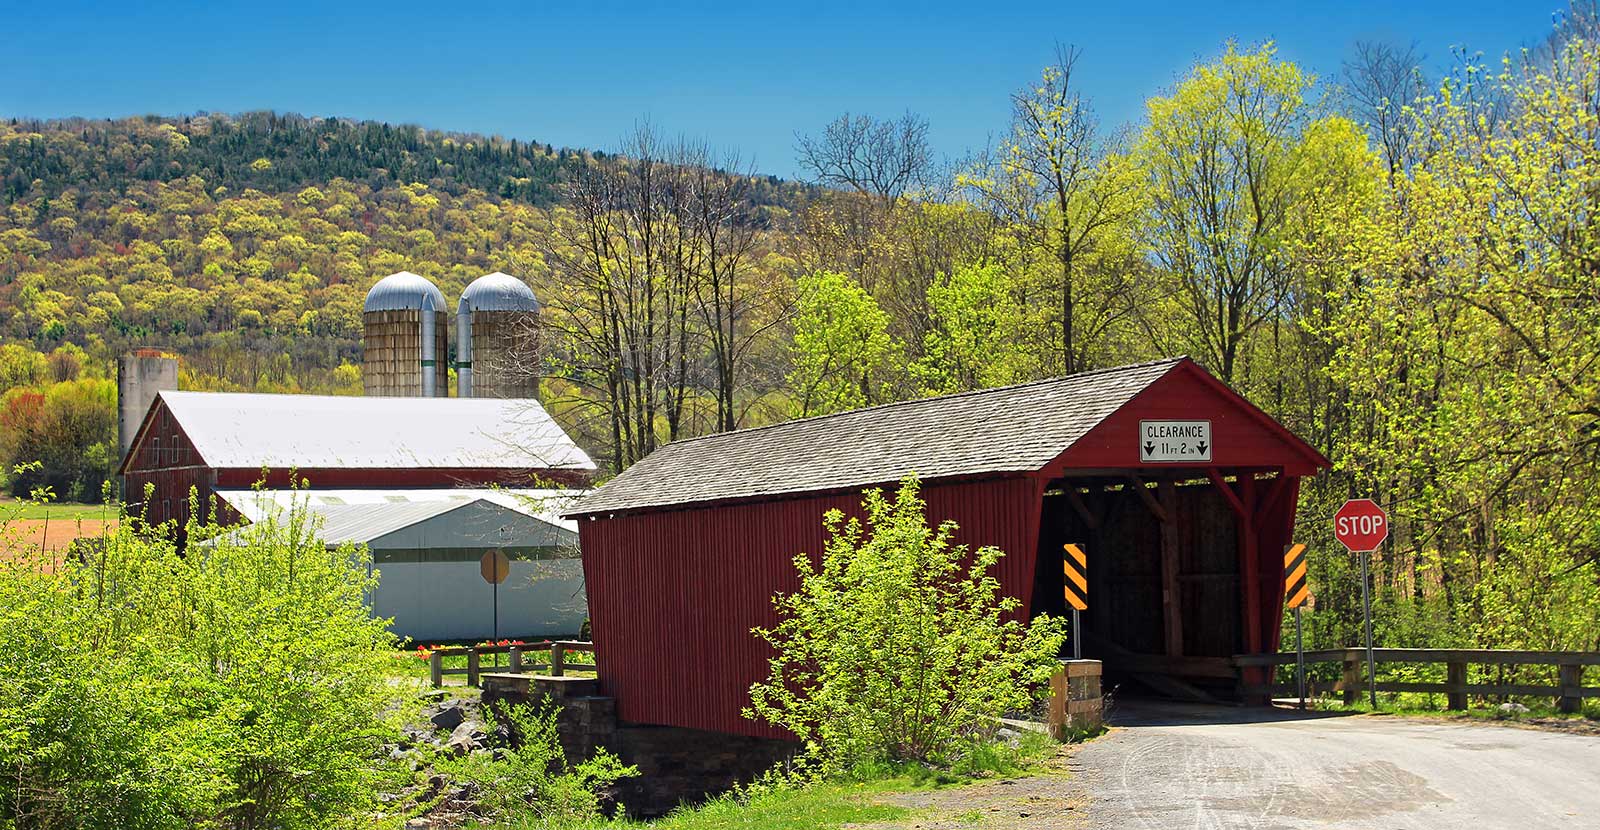 A covered bridge with a barn and silos in the background during spring. The leaves on the trees are new and bright green.